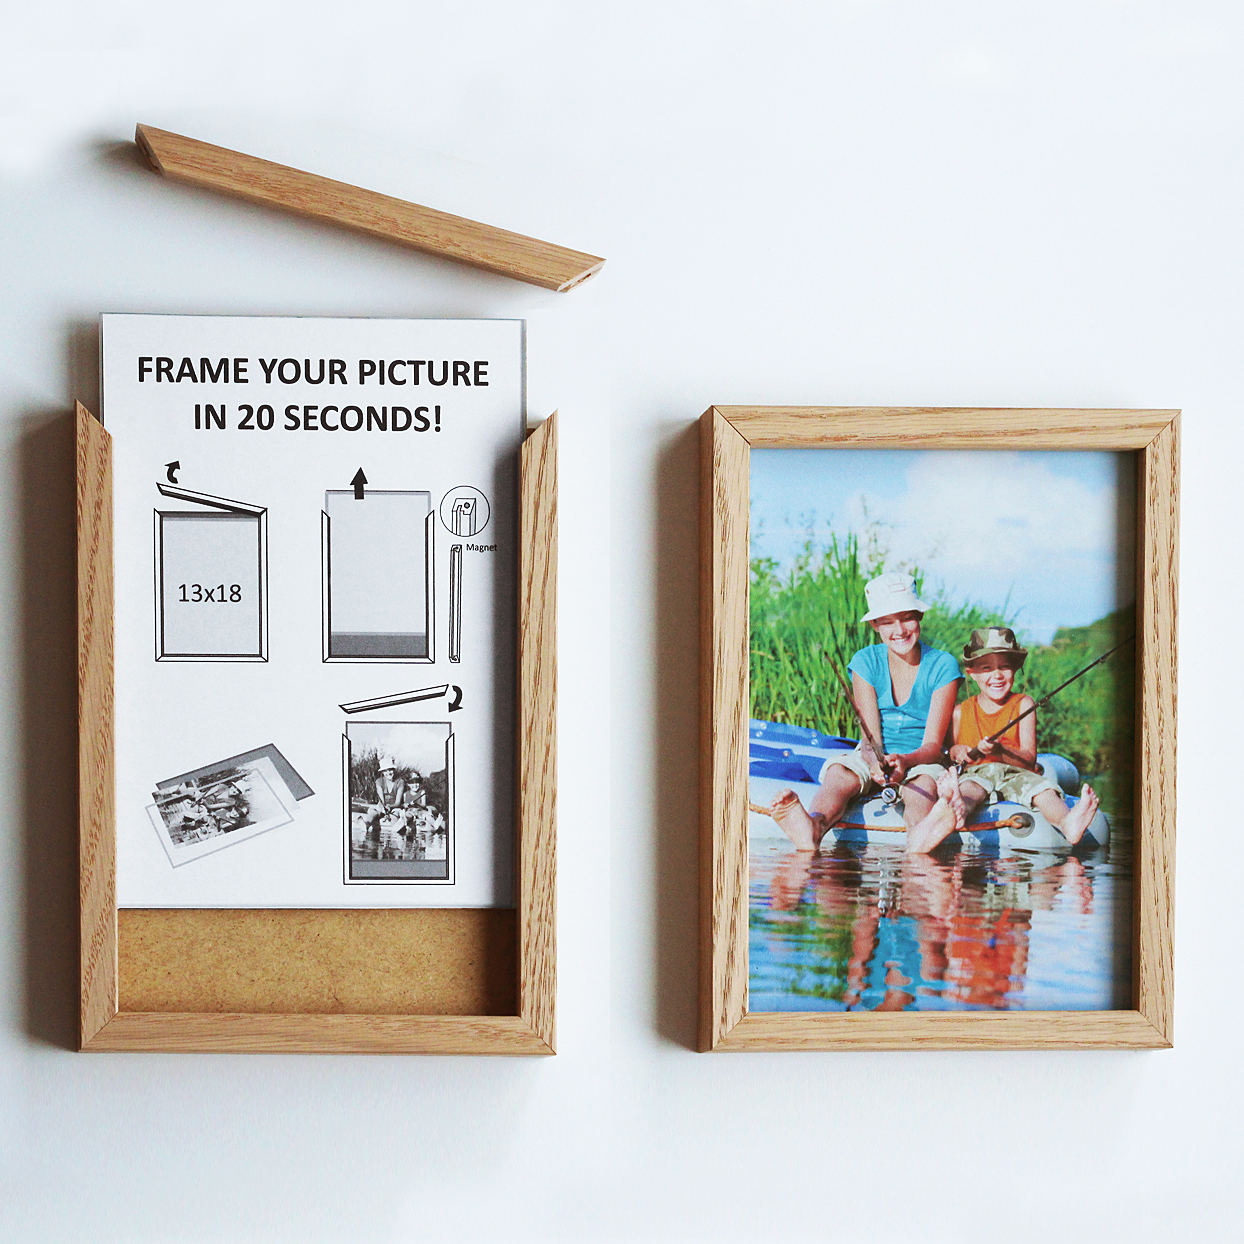 Oak wood magnetic frame with instruction marketing inlay, illustration of the magnetic side of the frame detached and sliding away the glass with backside and oak wood magnetic frame already finished with framed family portrait . Produced by Debex Suisse.